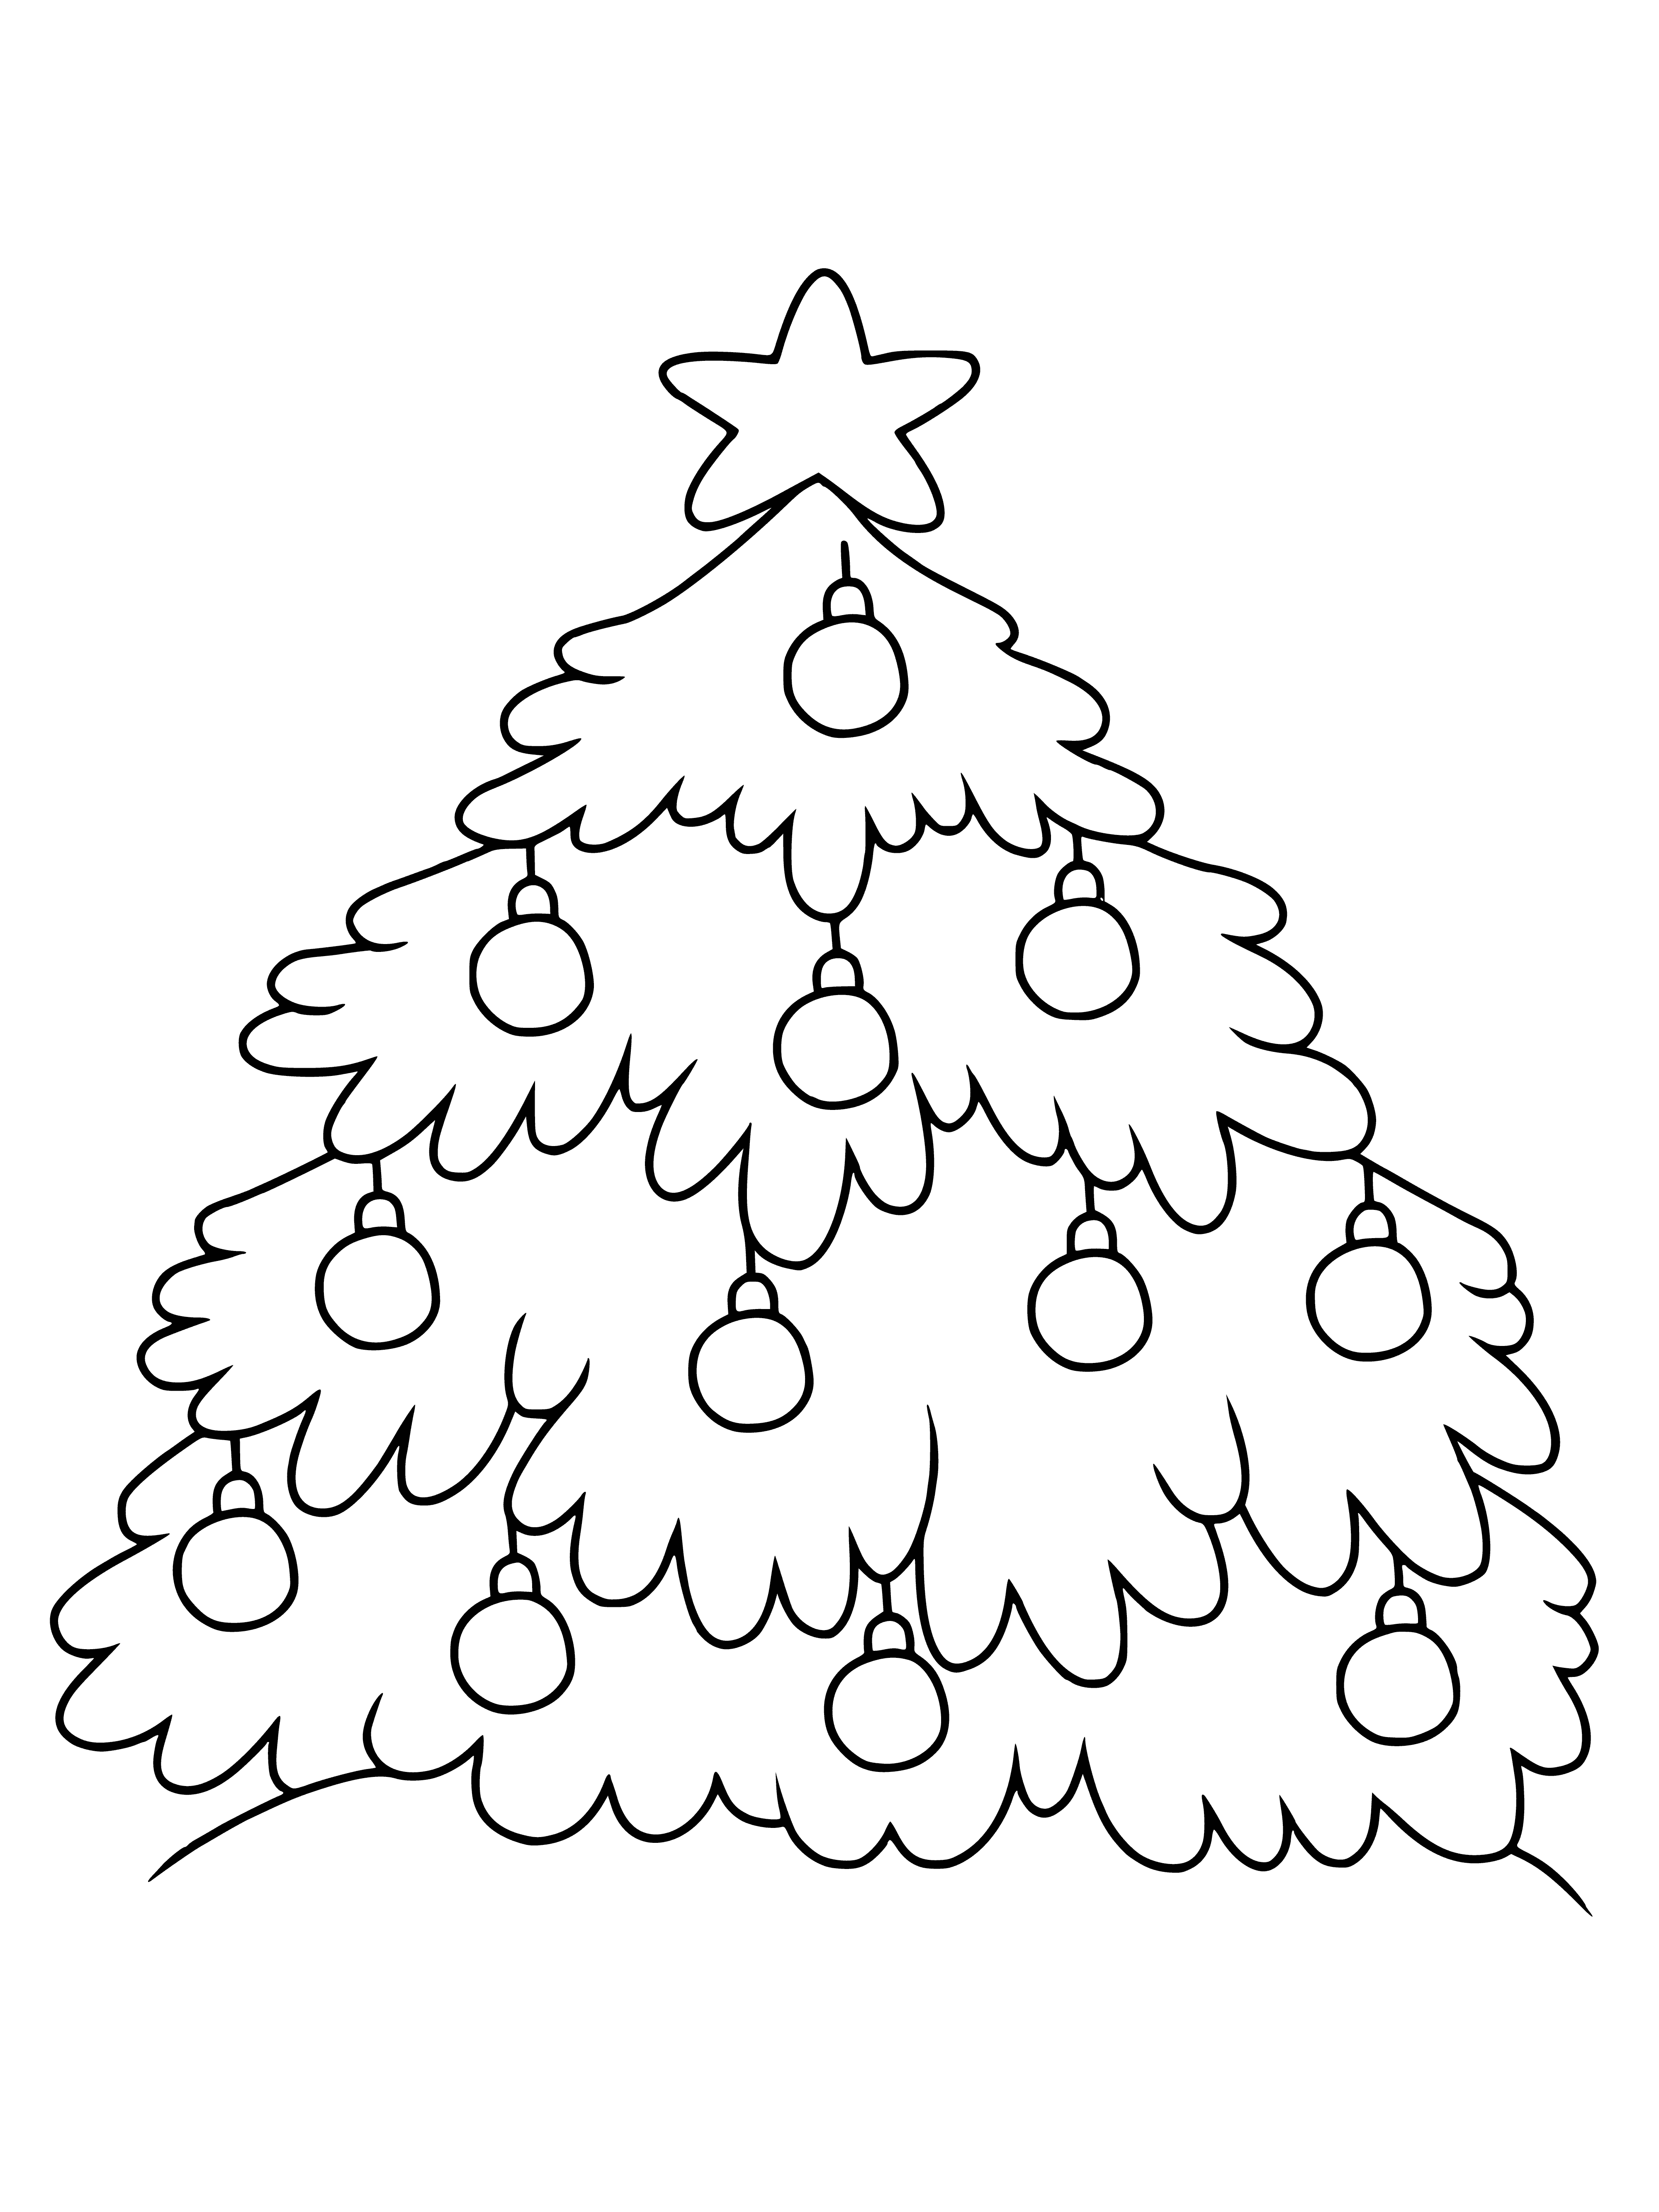 coloring page: 3 Christm. trees w/ diff. col. lights & ornaments: tallest has star, smaller has angel, & 3rd has bow. #ColoringFun